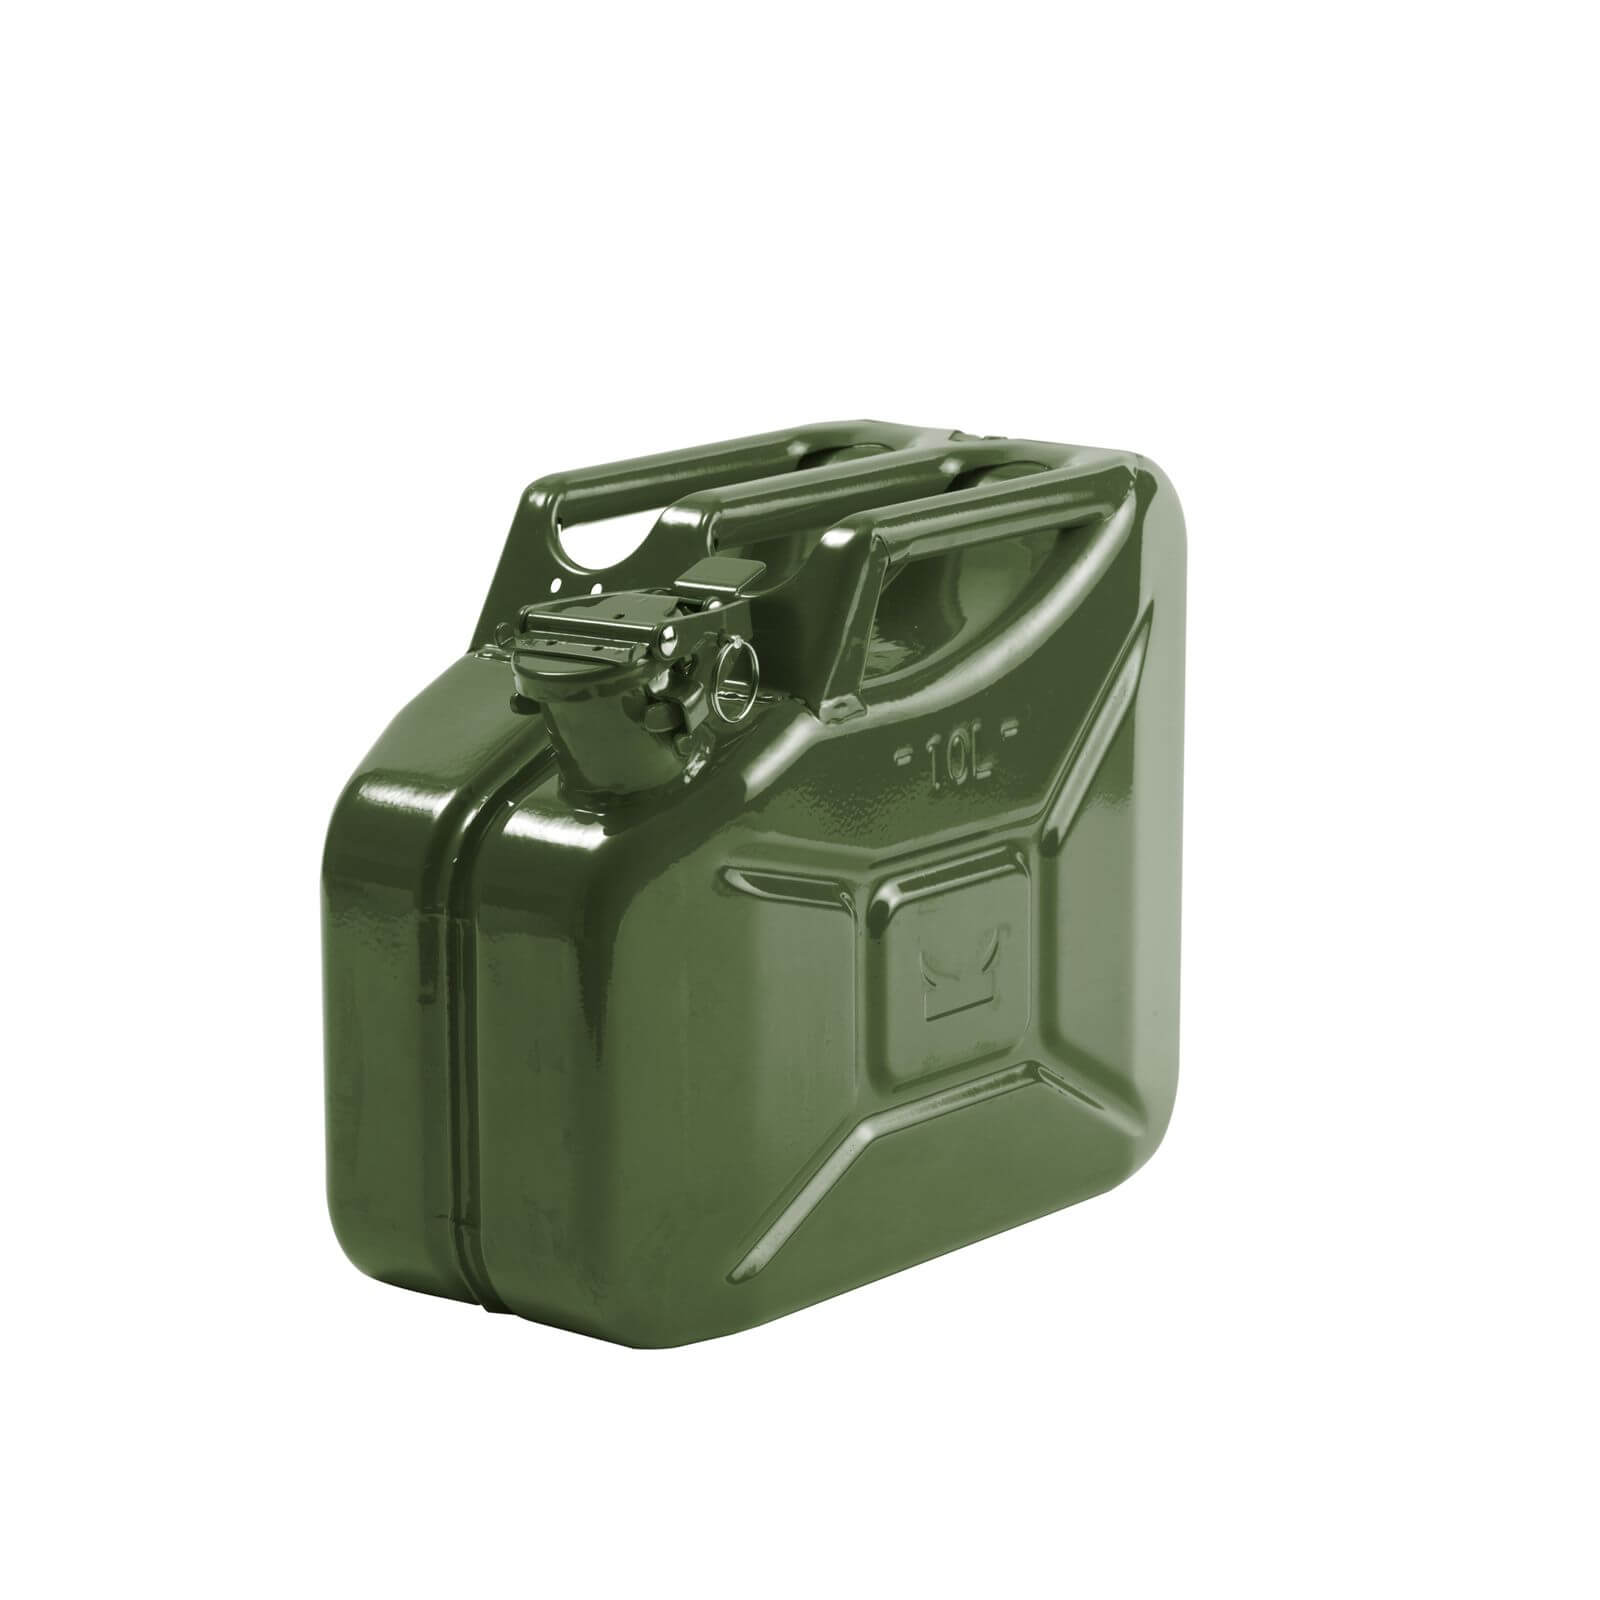 10L Steel Jerry Can - Olive Green